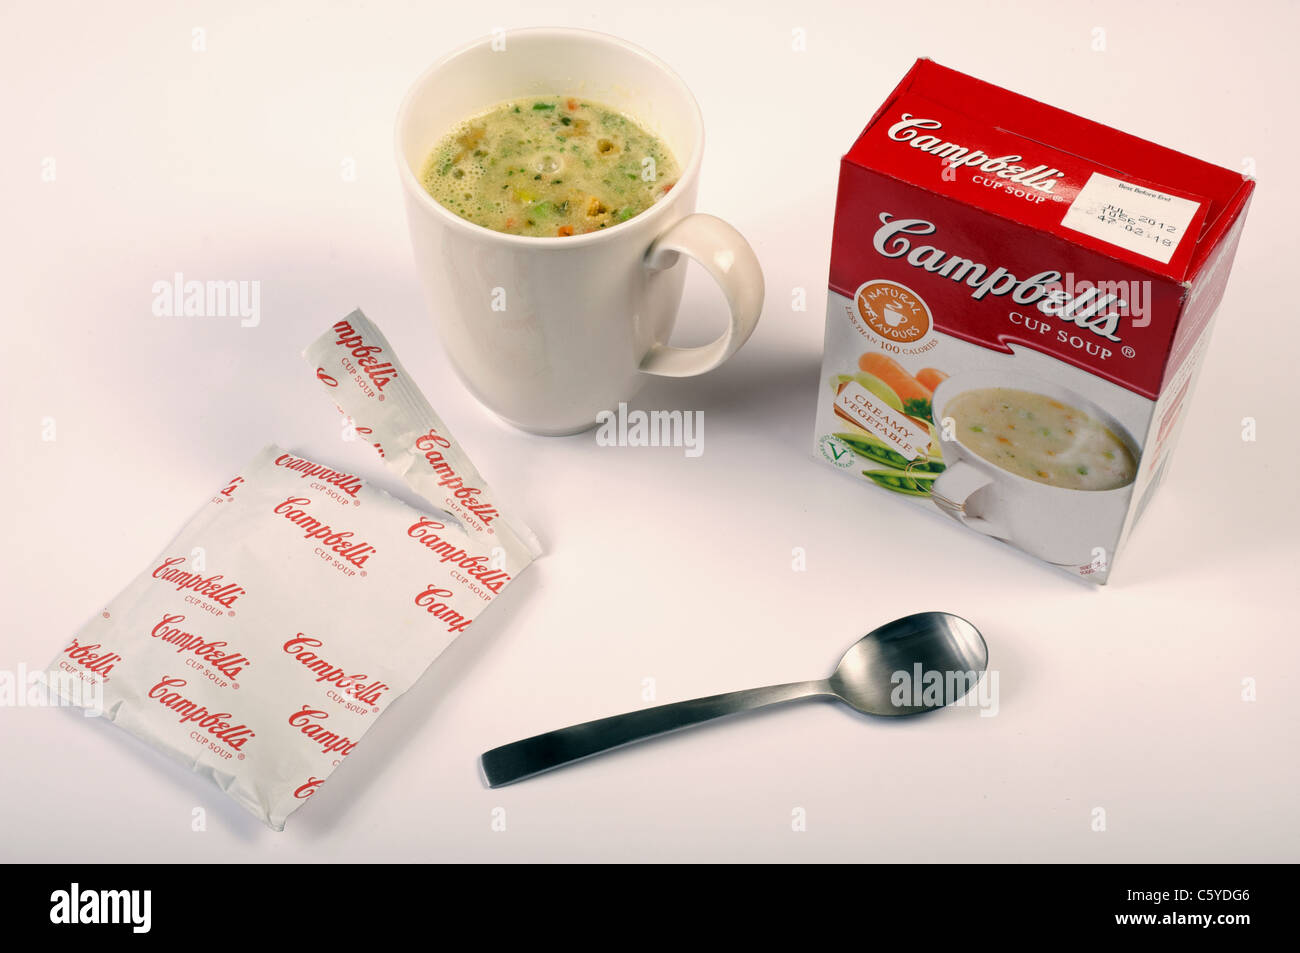 Campbell's cup soup Stock Photo